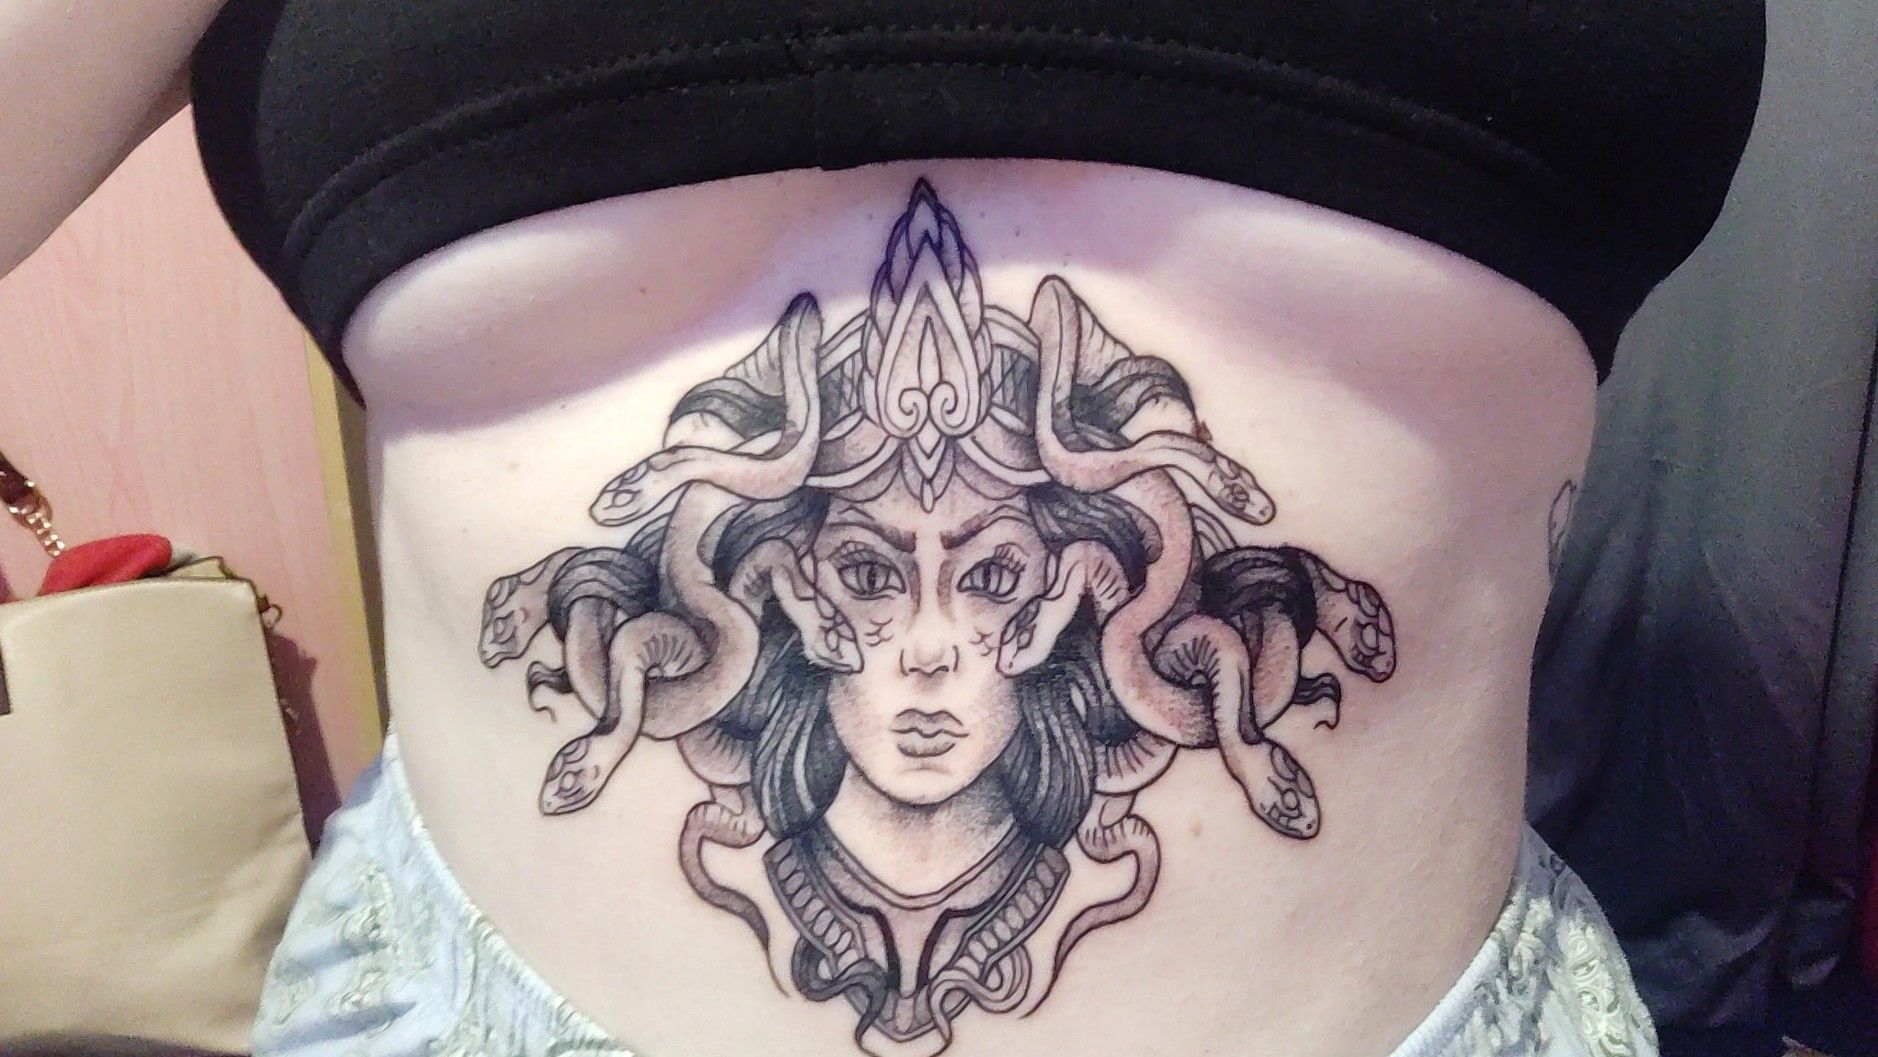 Nicky Cube Tattoo  Medusa sternum tattoo Loved doing this  I feel  like petrifying patriarchy today what about you Comment below Dont miss  a session Follow nickycube  tattoomecube307com         